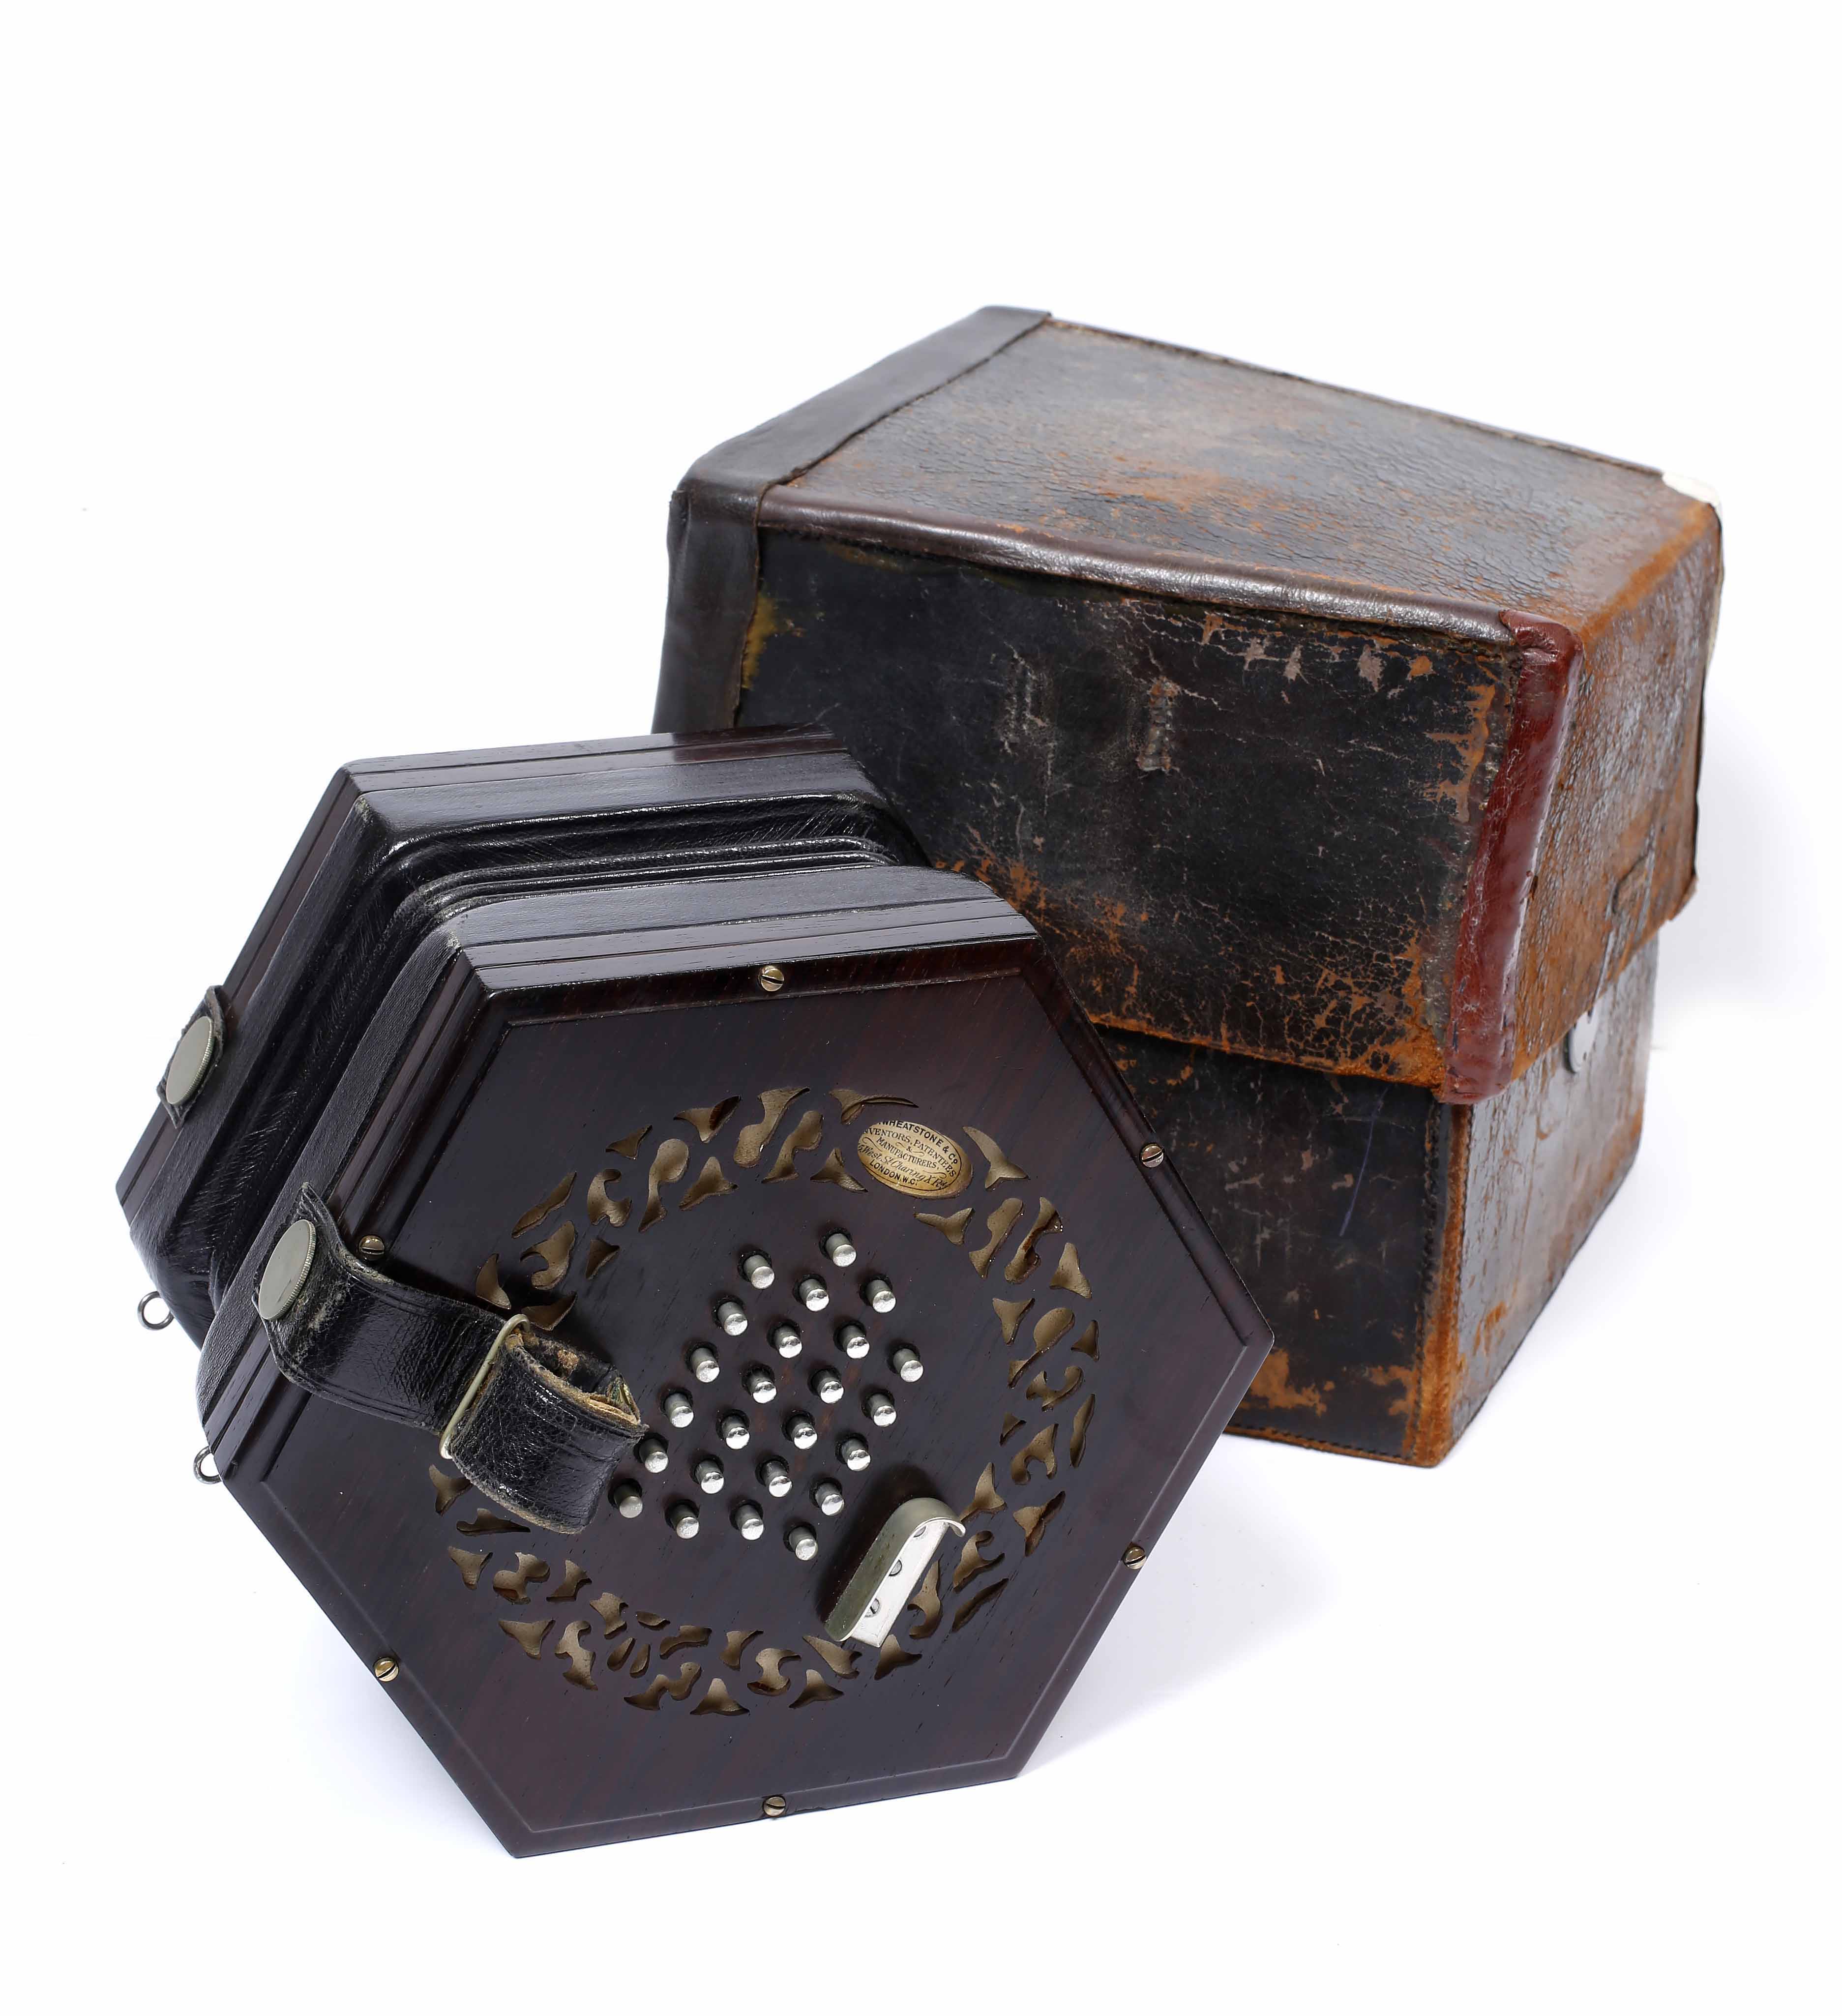 A ROSEWOOD CONCERTINA by Wheatstone & Co., with forty eight buttons and numbered 20140